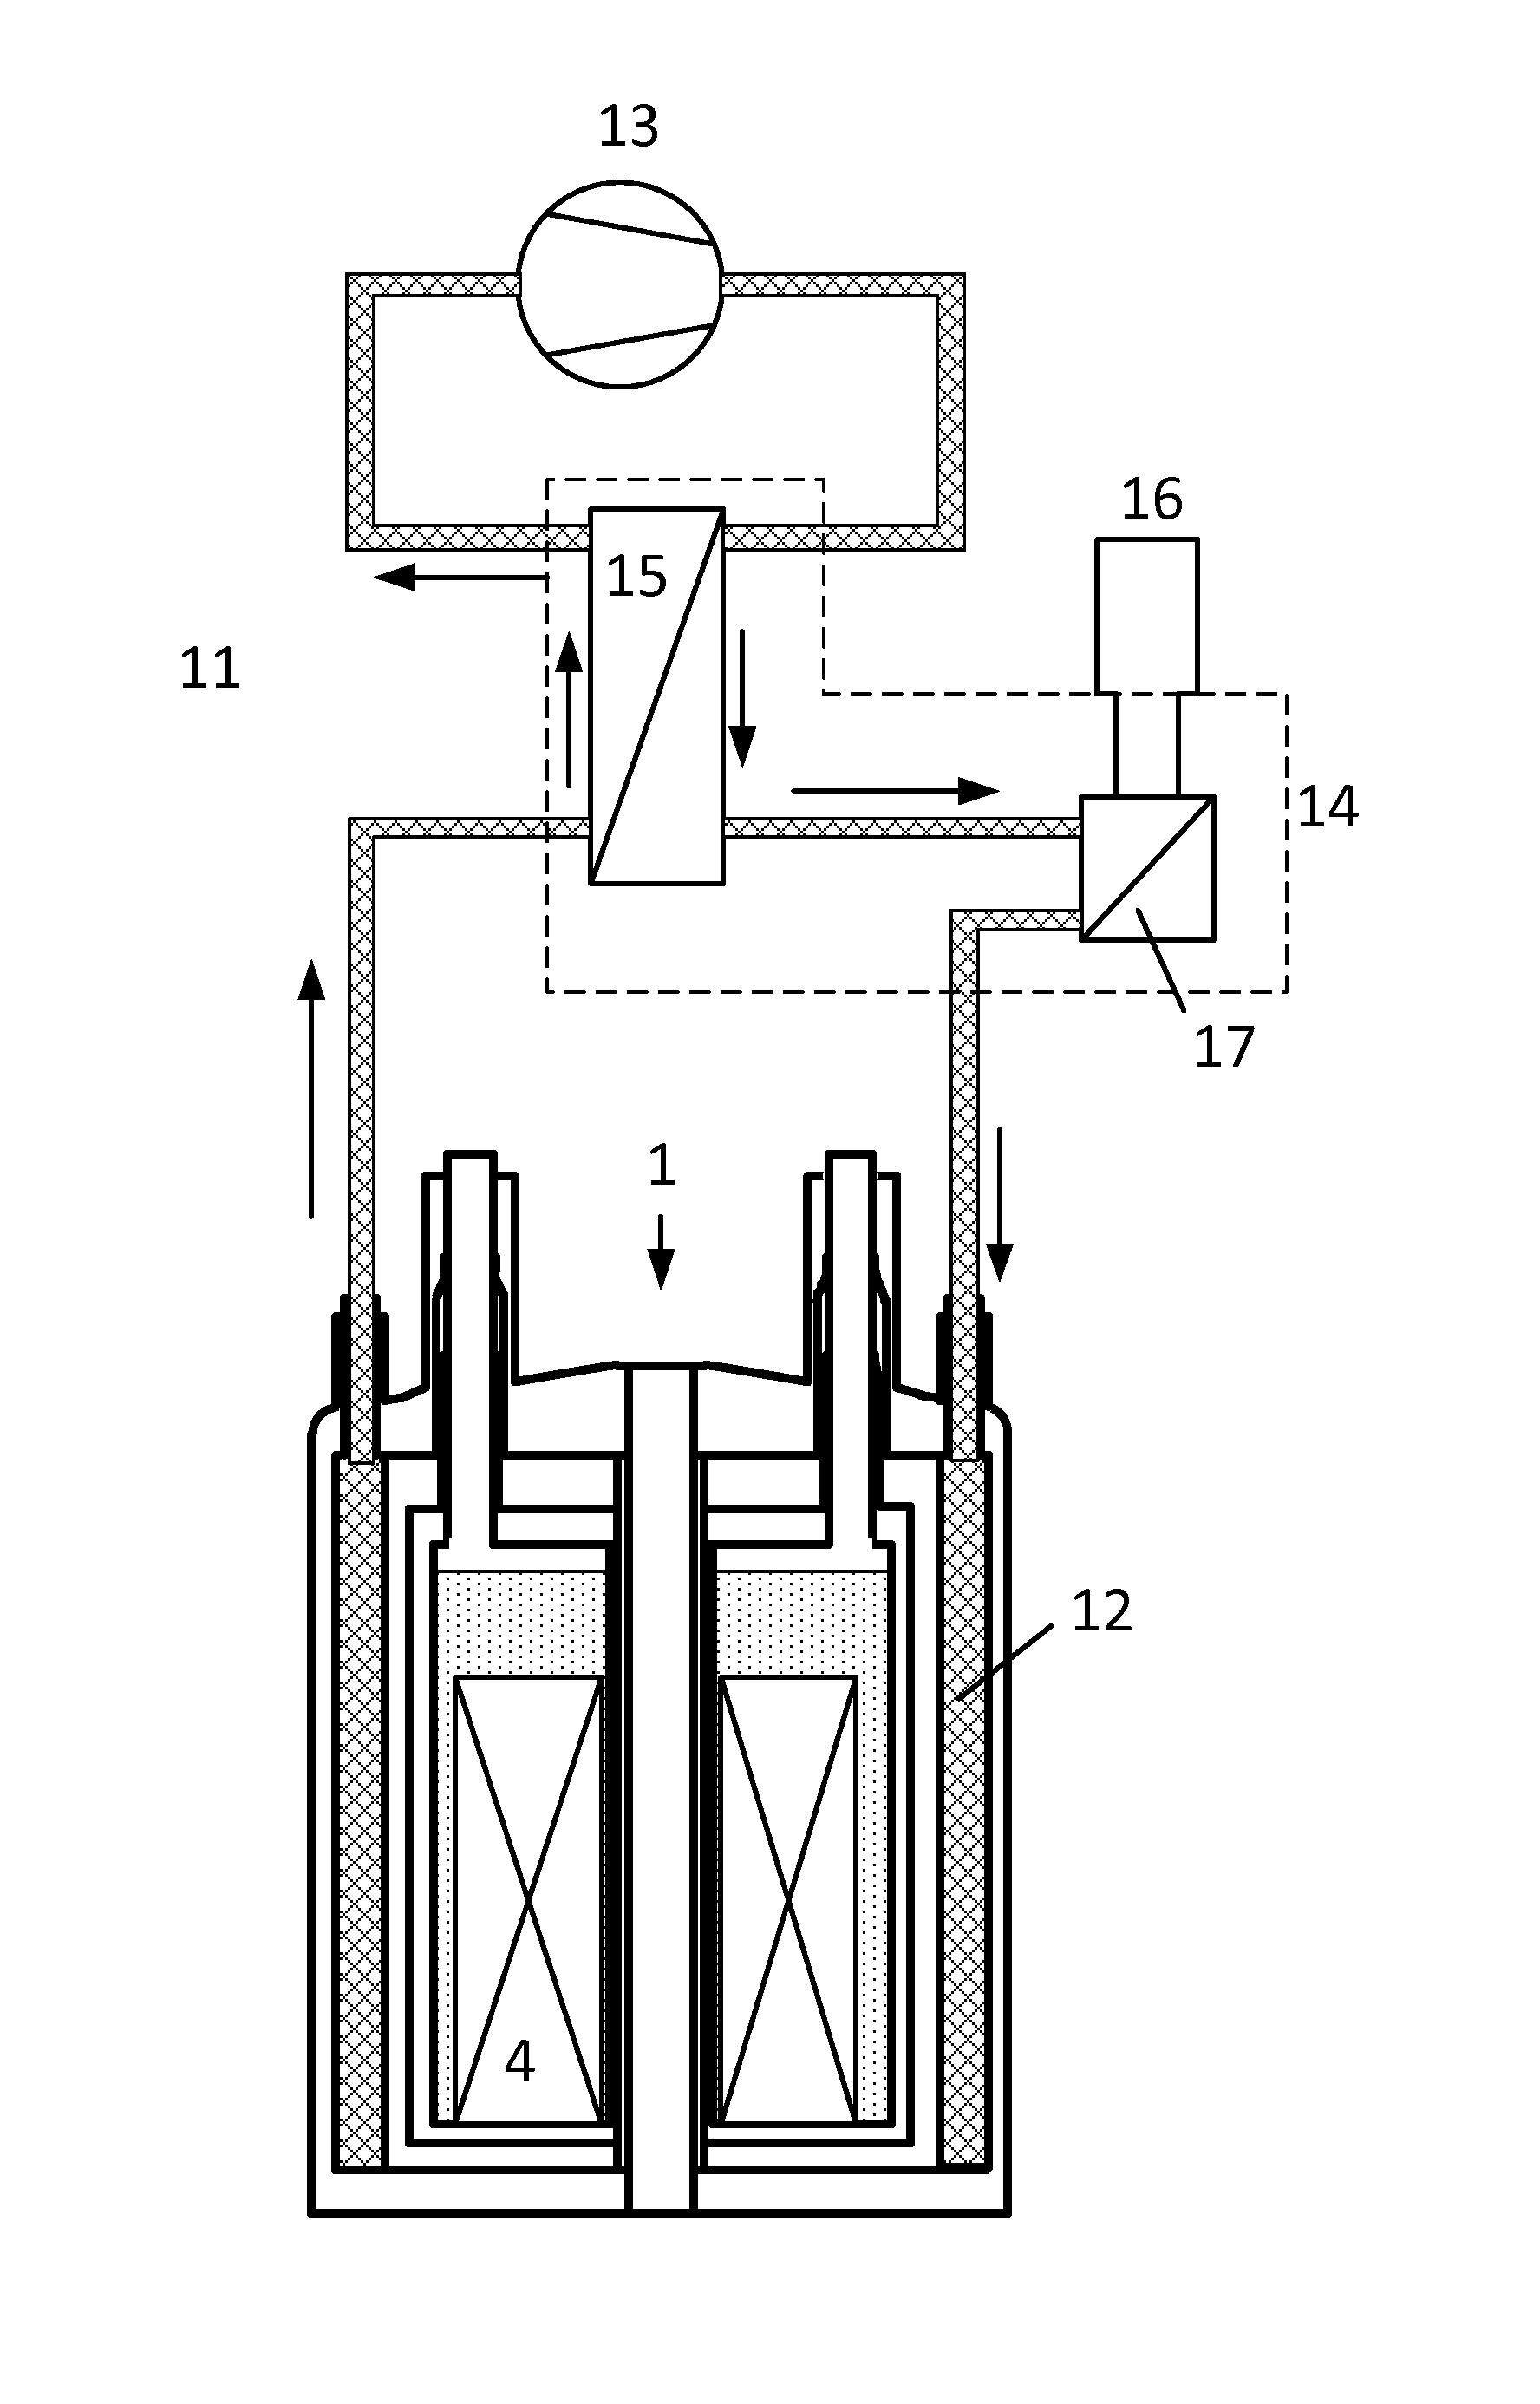 Method for reconfiguring a cryostat configuration for recirculation cooling